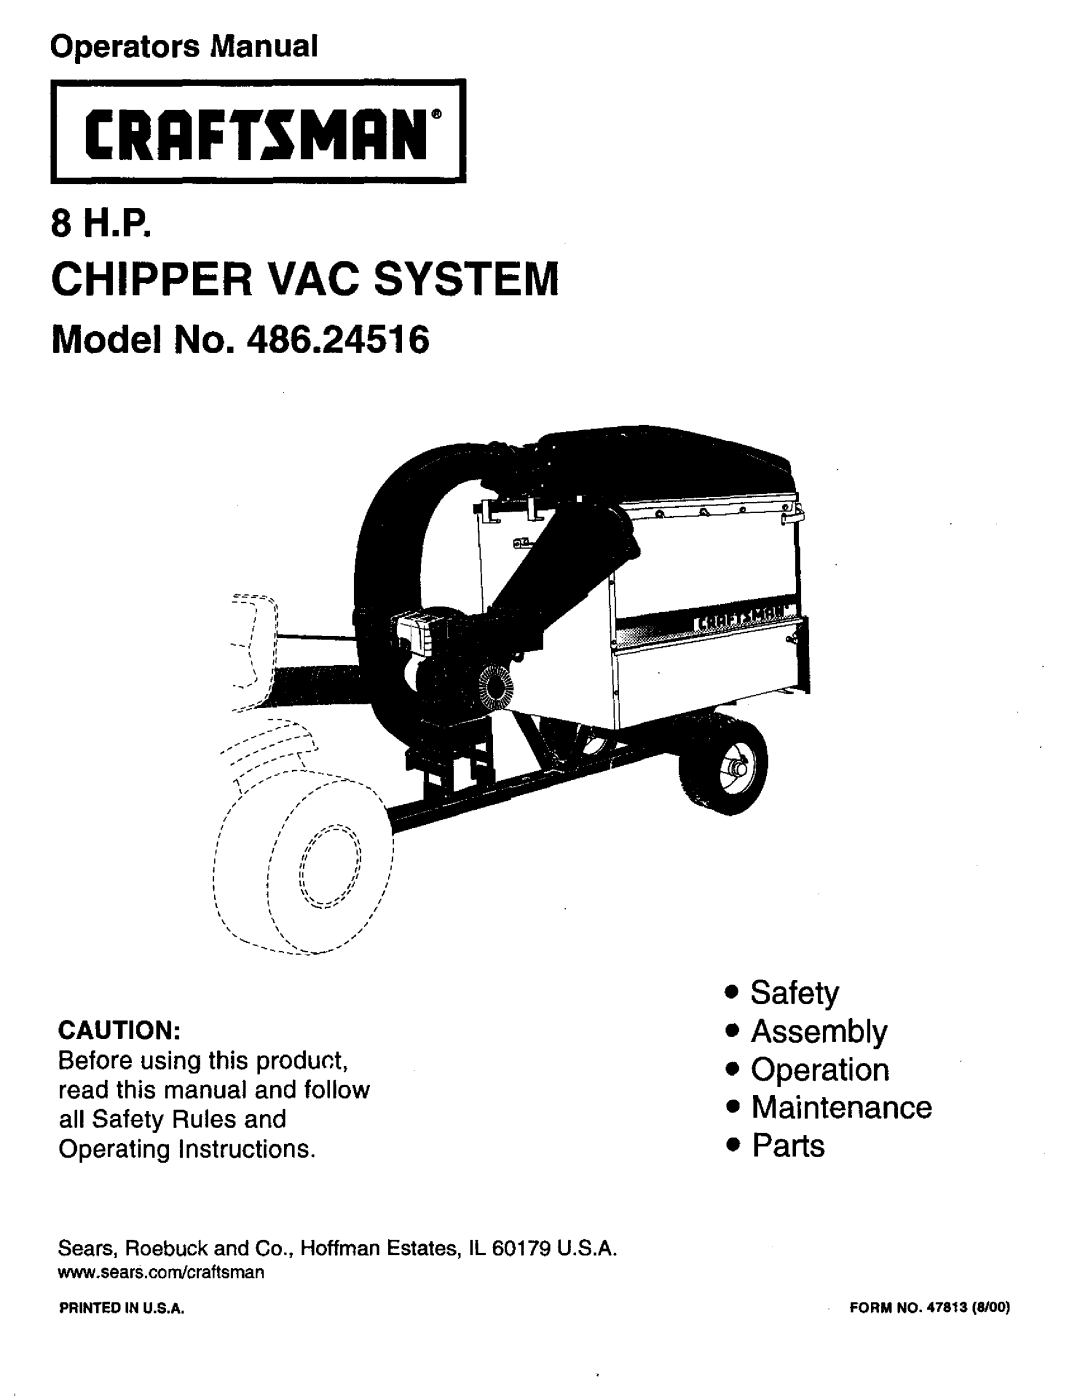 Craftsman 486.24516 manual Operators Manual, all Safety Rules and Operating Instructions, Lcrrftshrni, Chipper Vac System 